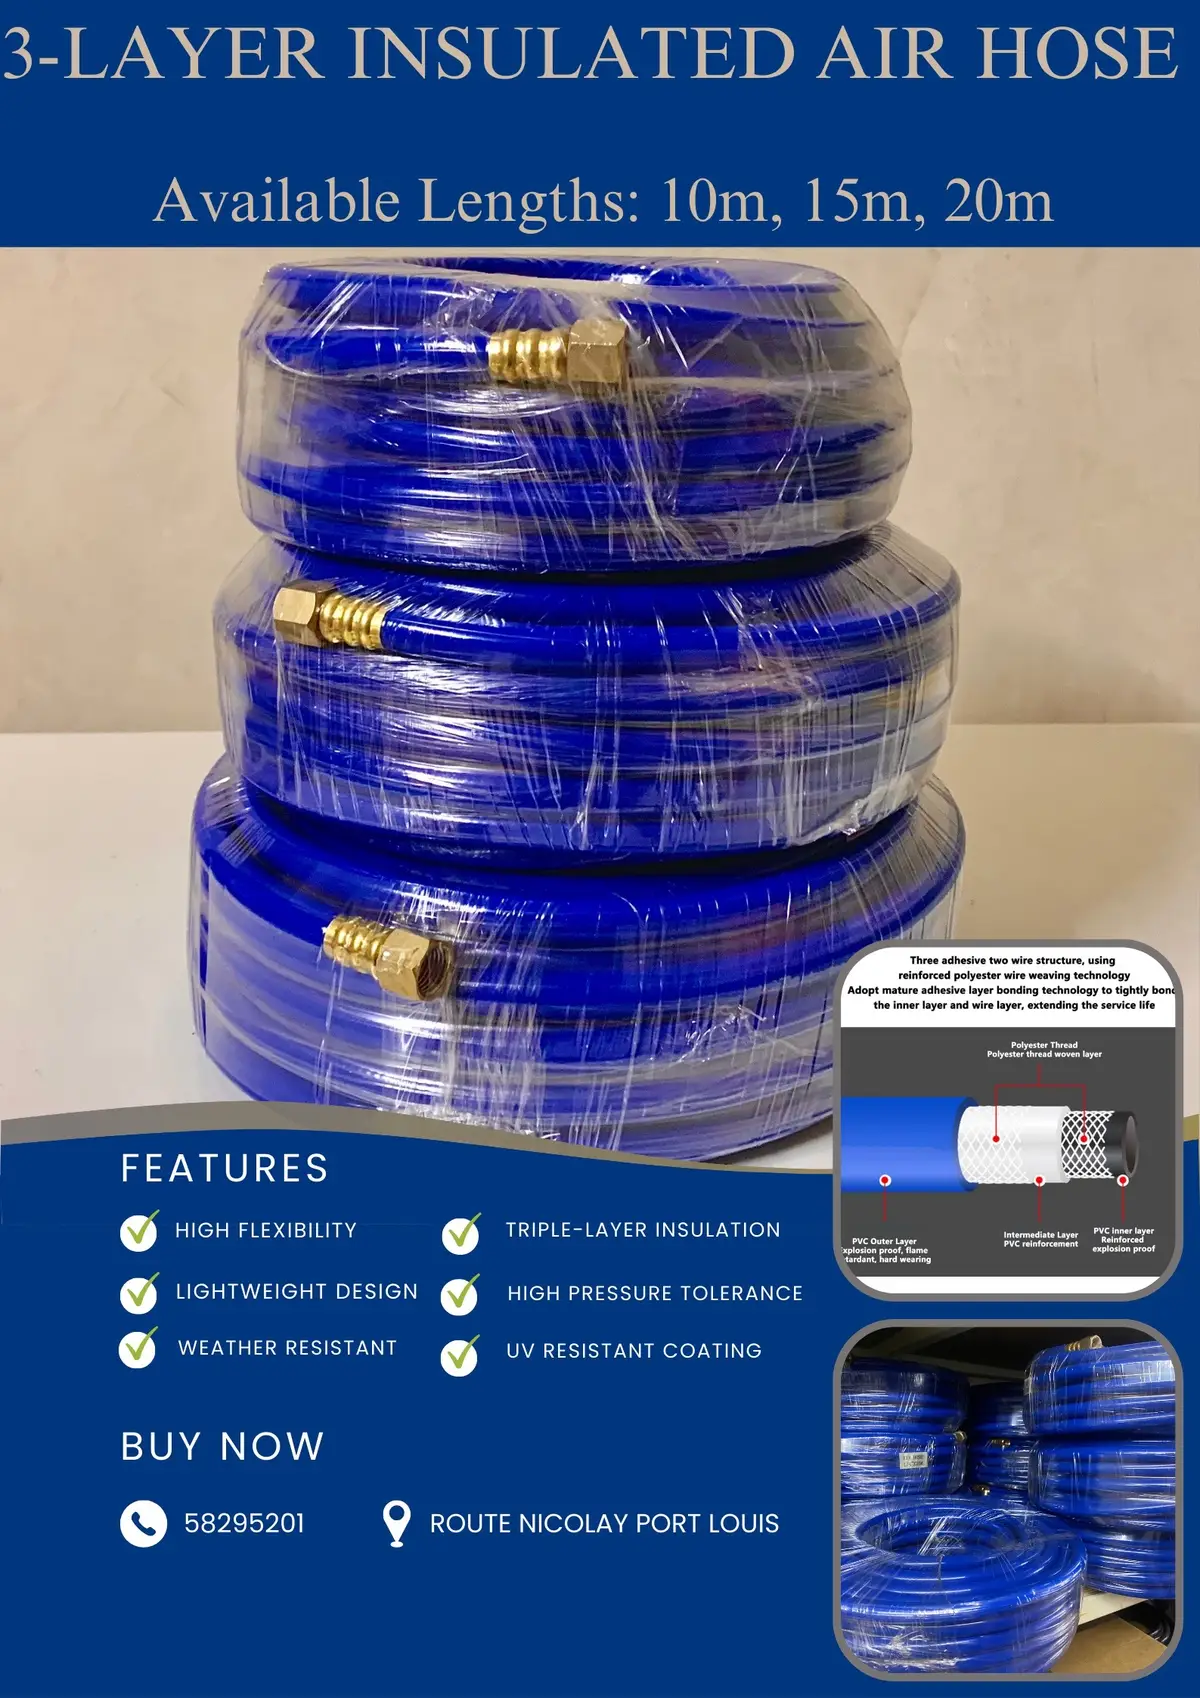 Available Lengths: 10m, 15m, 20m Price: Rs 75 per meter Perfect for professionals and DIY enthusiasts alike! Contact Us: For more details or to make a purchase, contact us on 58295201. #AirHose #DurableTools #HighQuality #AffordablePrice #DIY #ProfessionalTools #ShopNow #ProfessionalTools  #mauritius🇲🇺 #230 #portlouis #curepipe #rosehill 